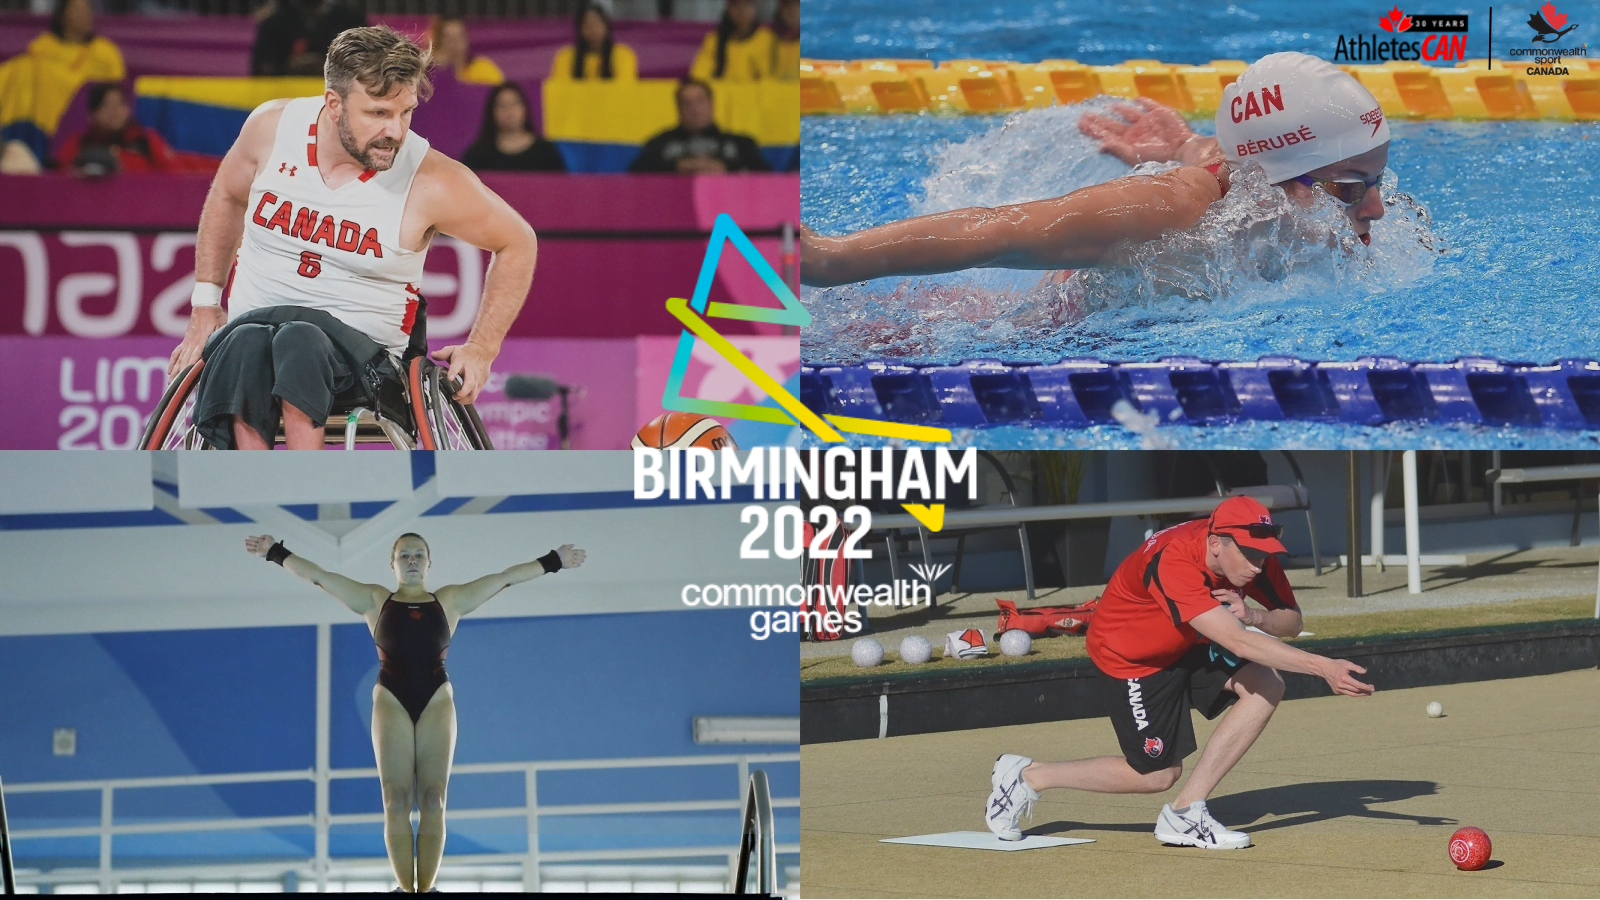 AthletesCAN celebrates Board members competing at Birmingham 2022 Commonwealth Games following 30th anniversary